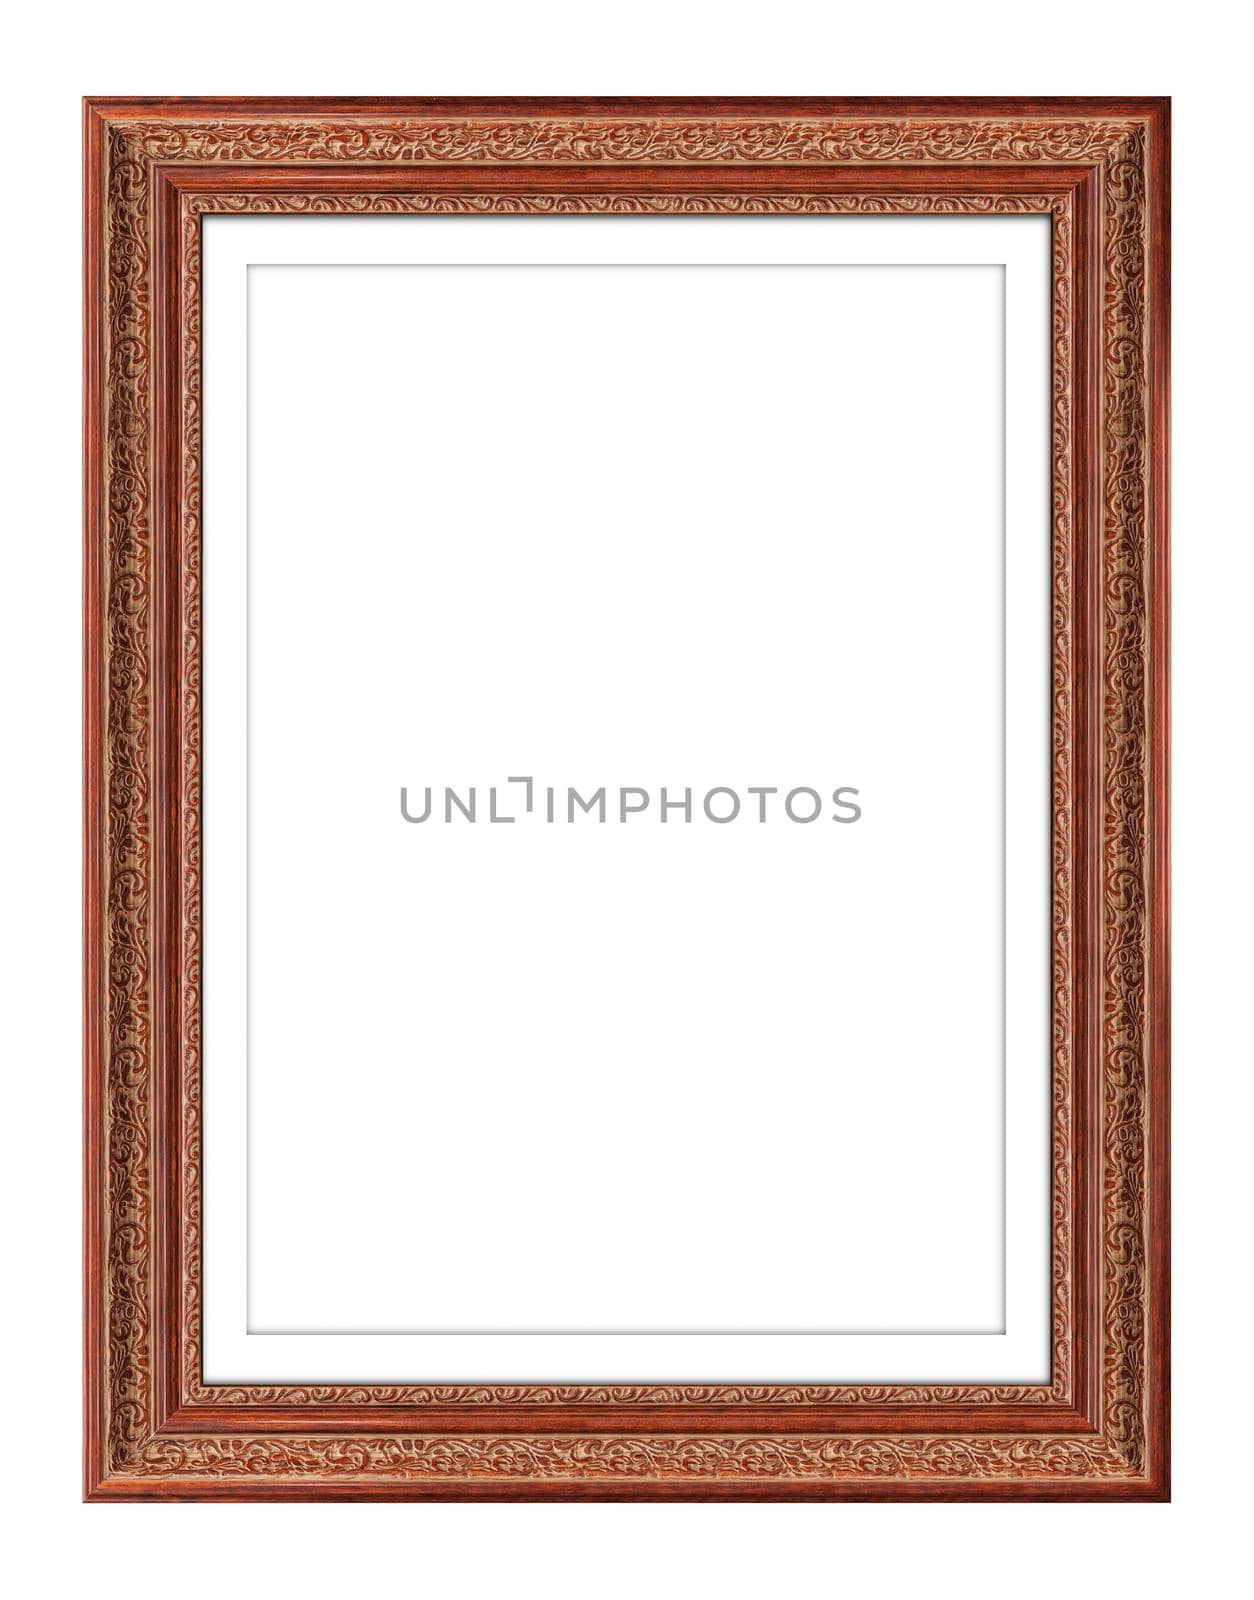 Red wooden frame for picture or photo, frame for a mirror isolated on white background. With clipping path